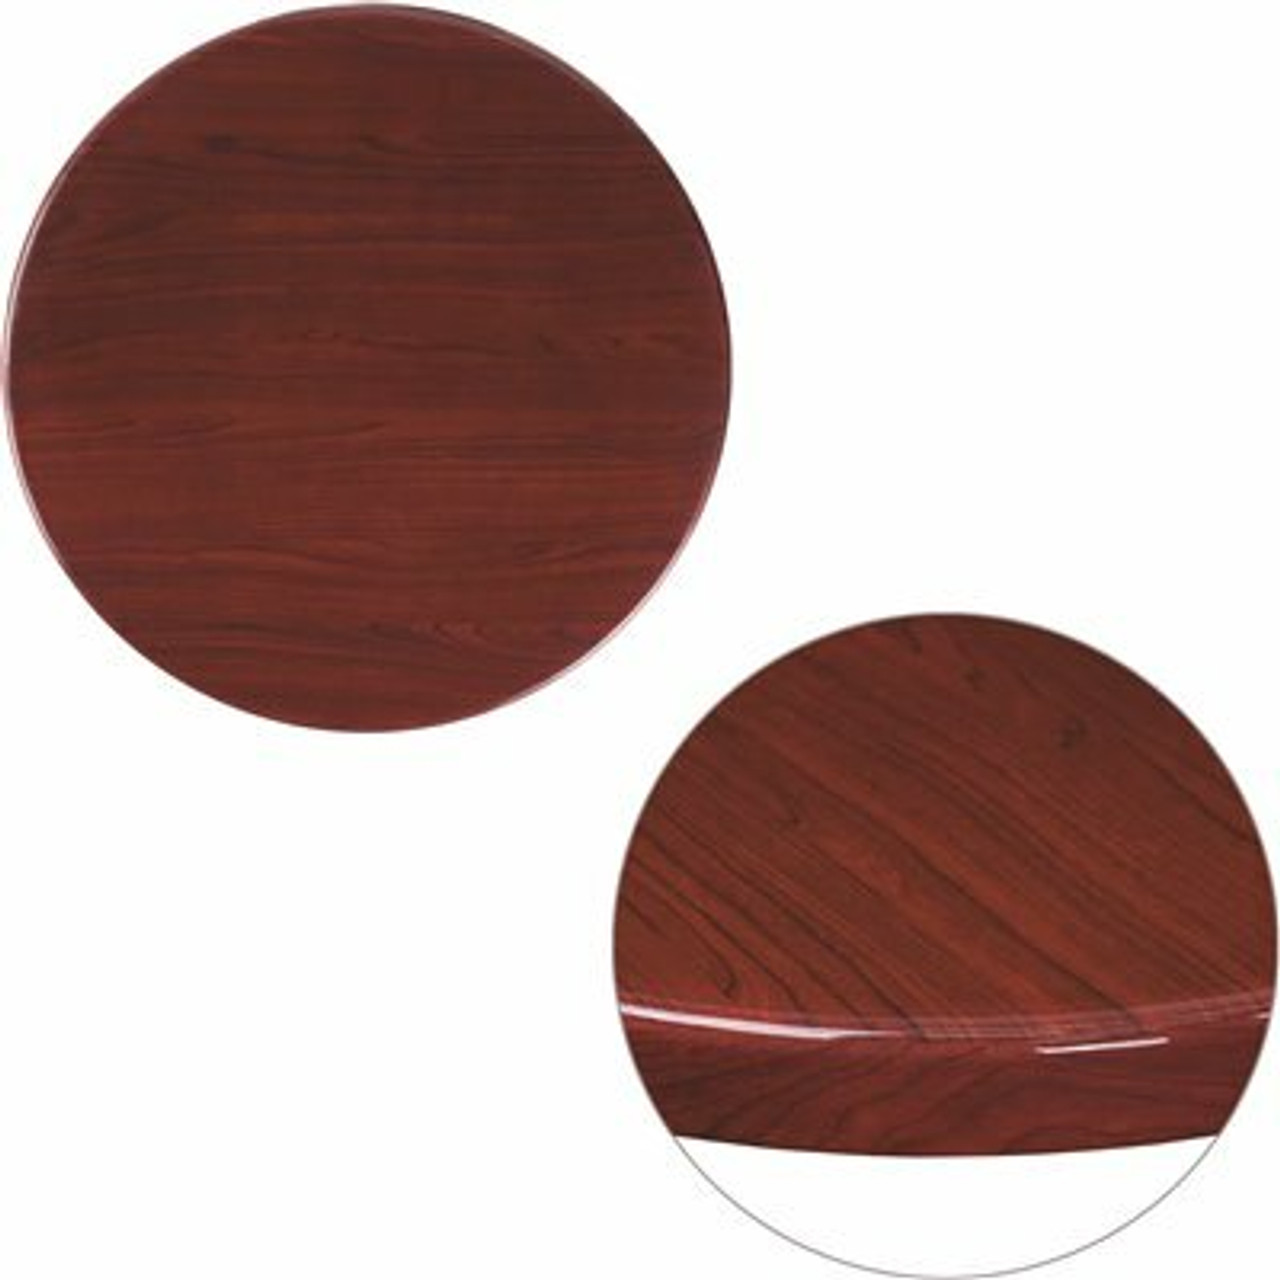 Flash Furniture 24 In. Round High-Gloss Mahogany Resin Table Top With 2 In. Thick Drop-Lip